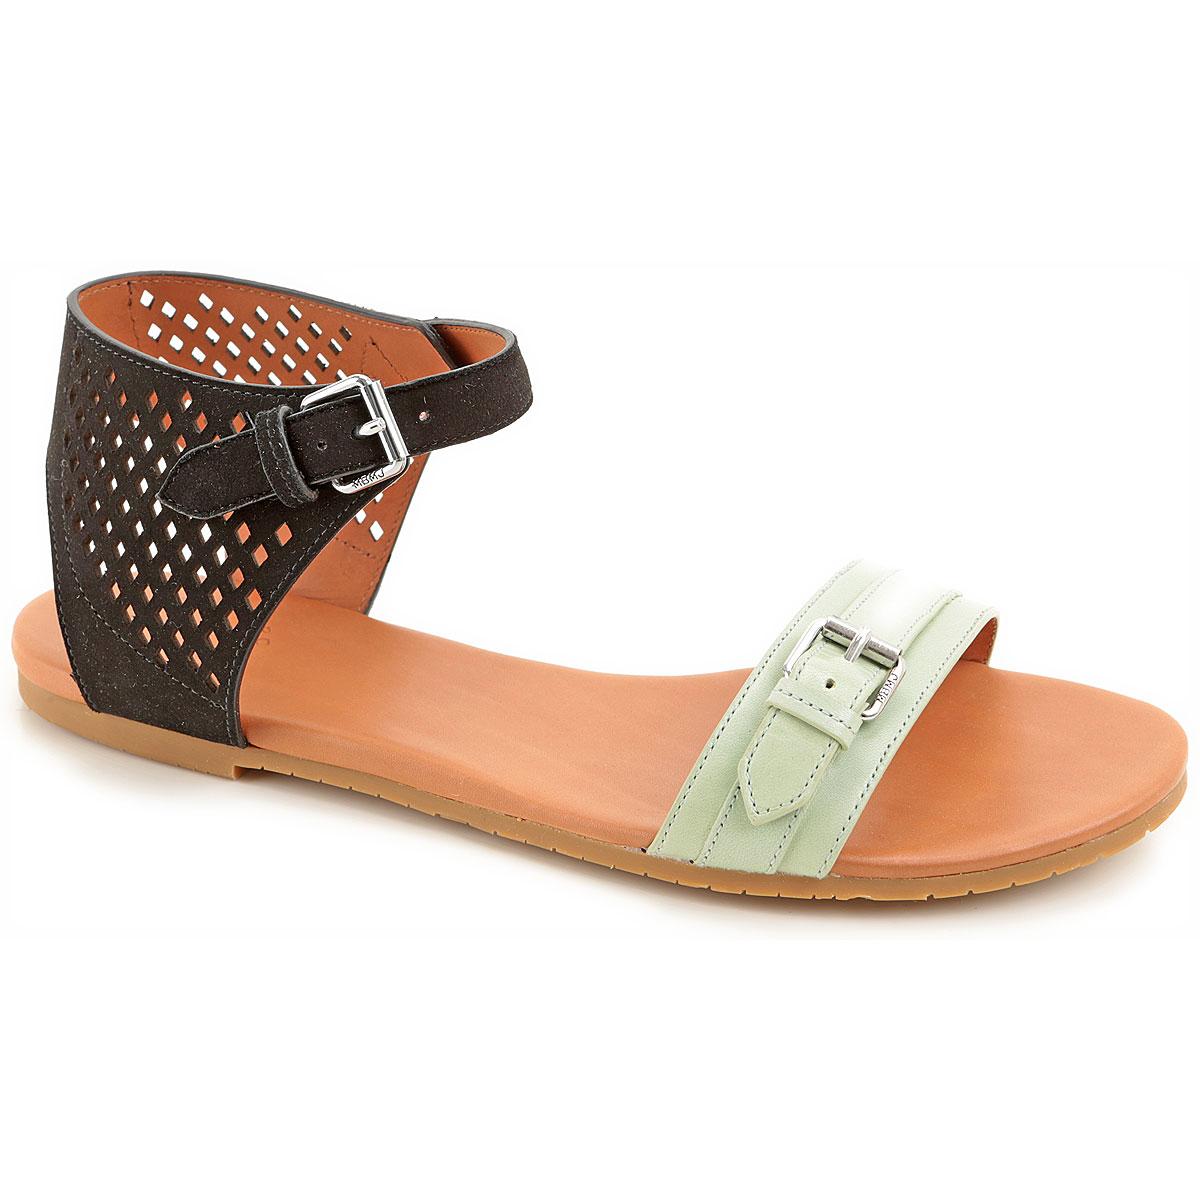 Marc Jacobs Sandals For Women On Sale In Outlet in Black - Lyst